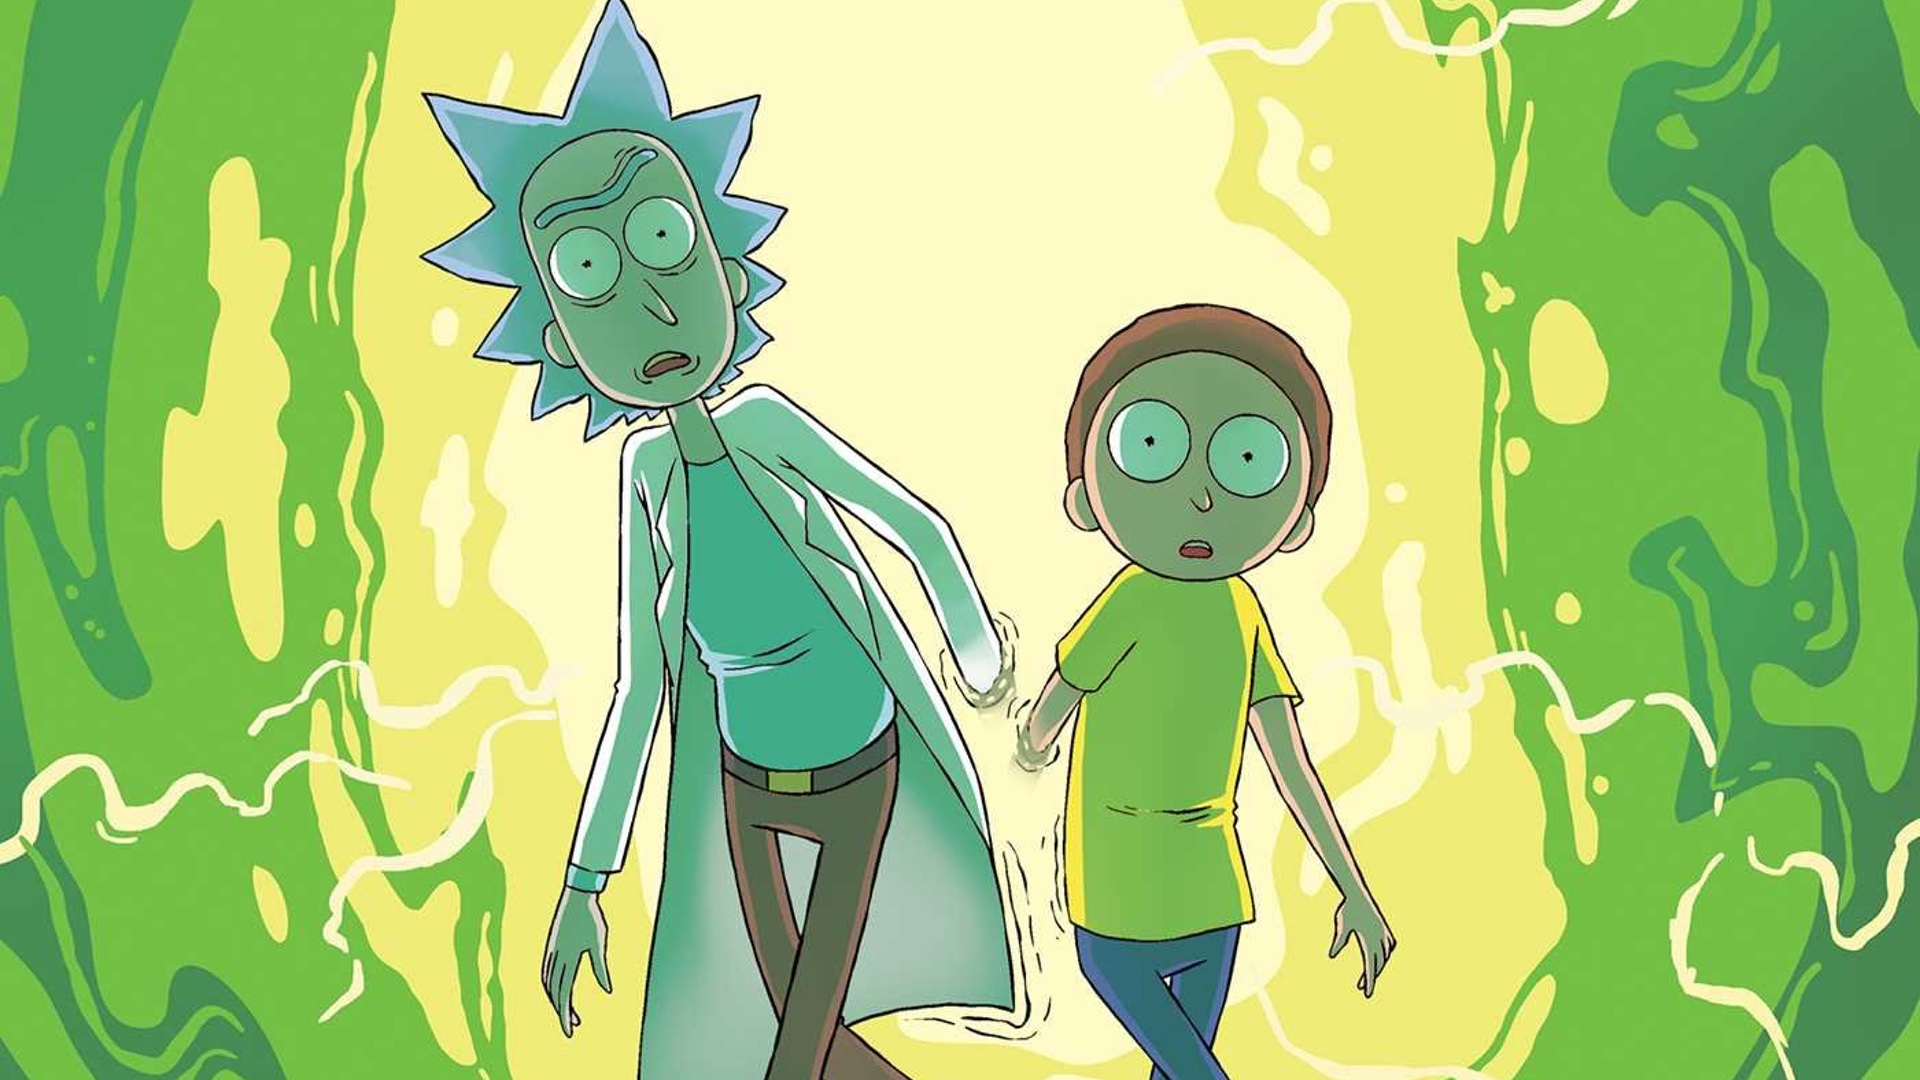 Rick and Morty season 4 release date